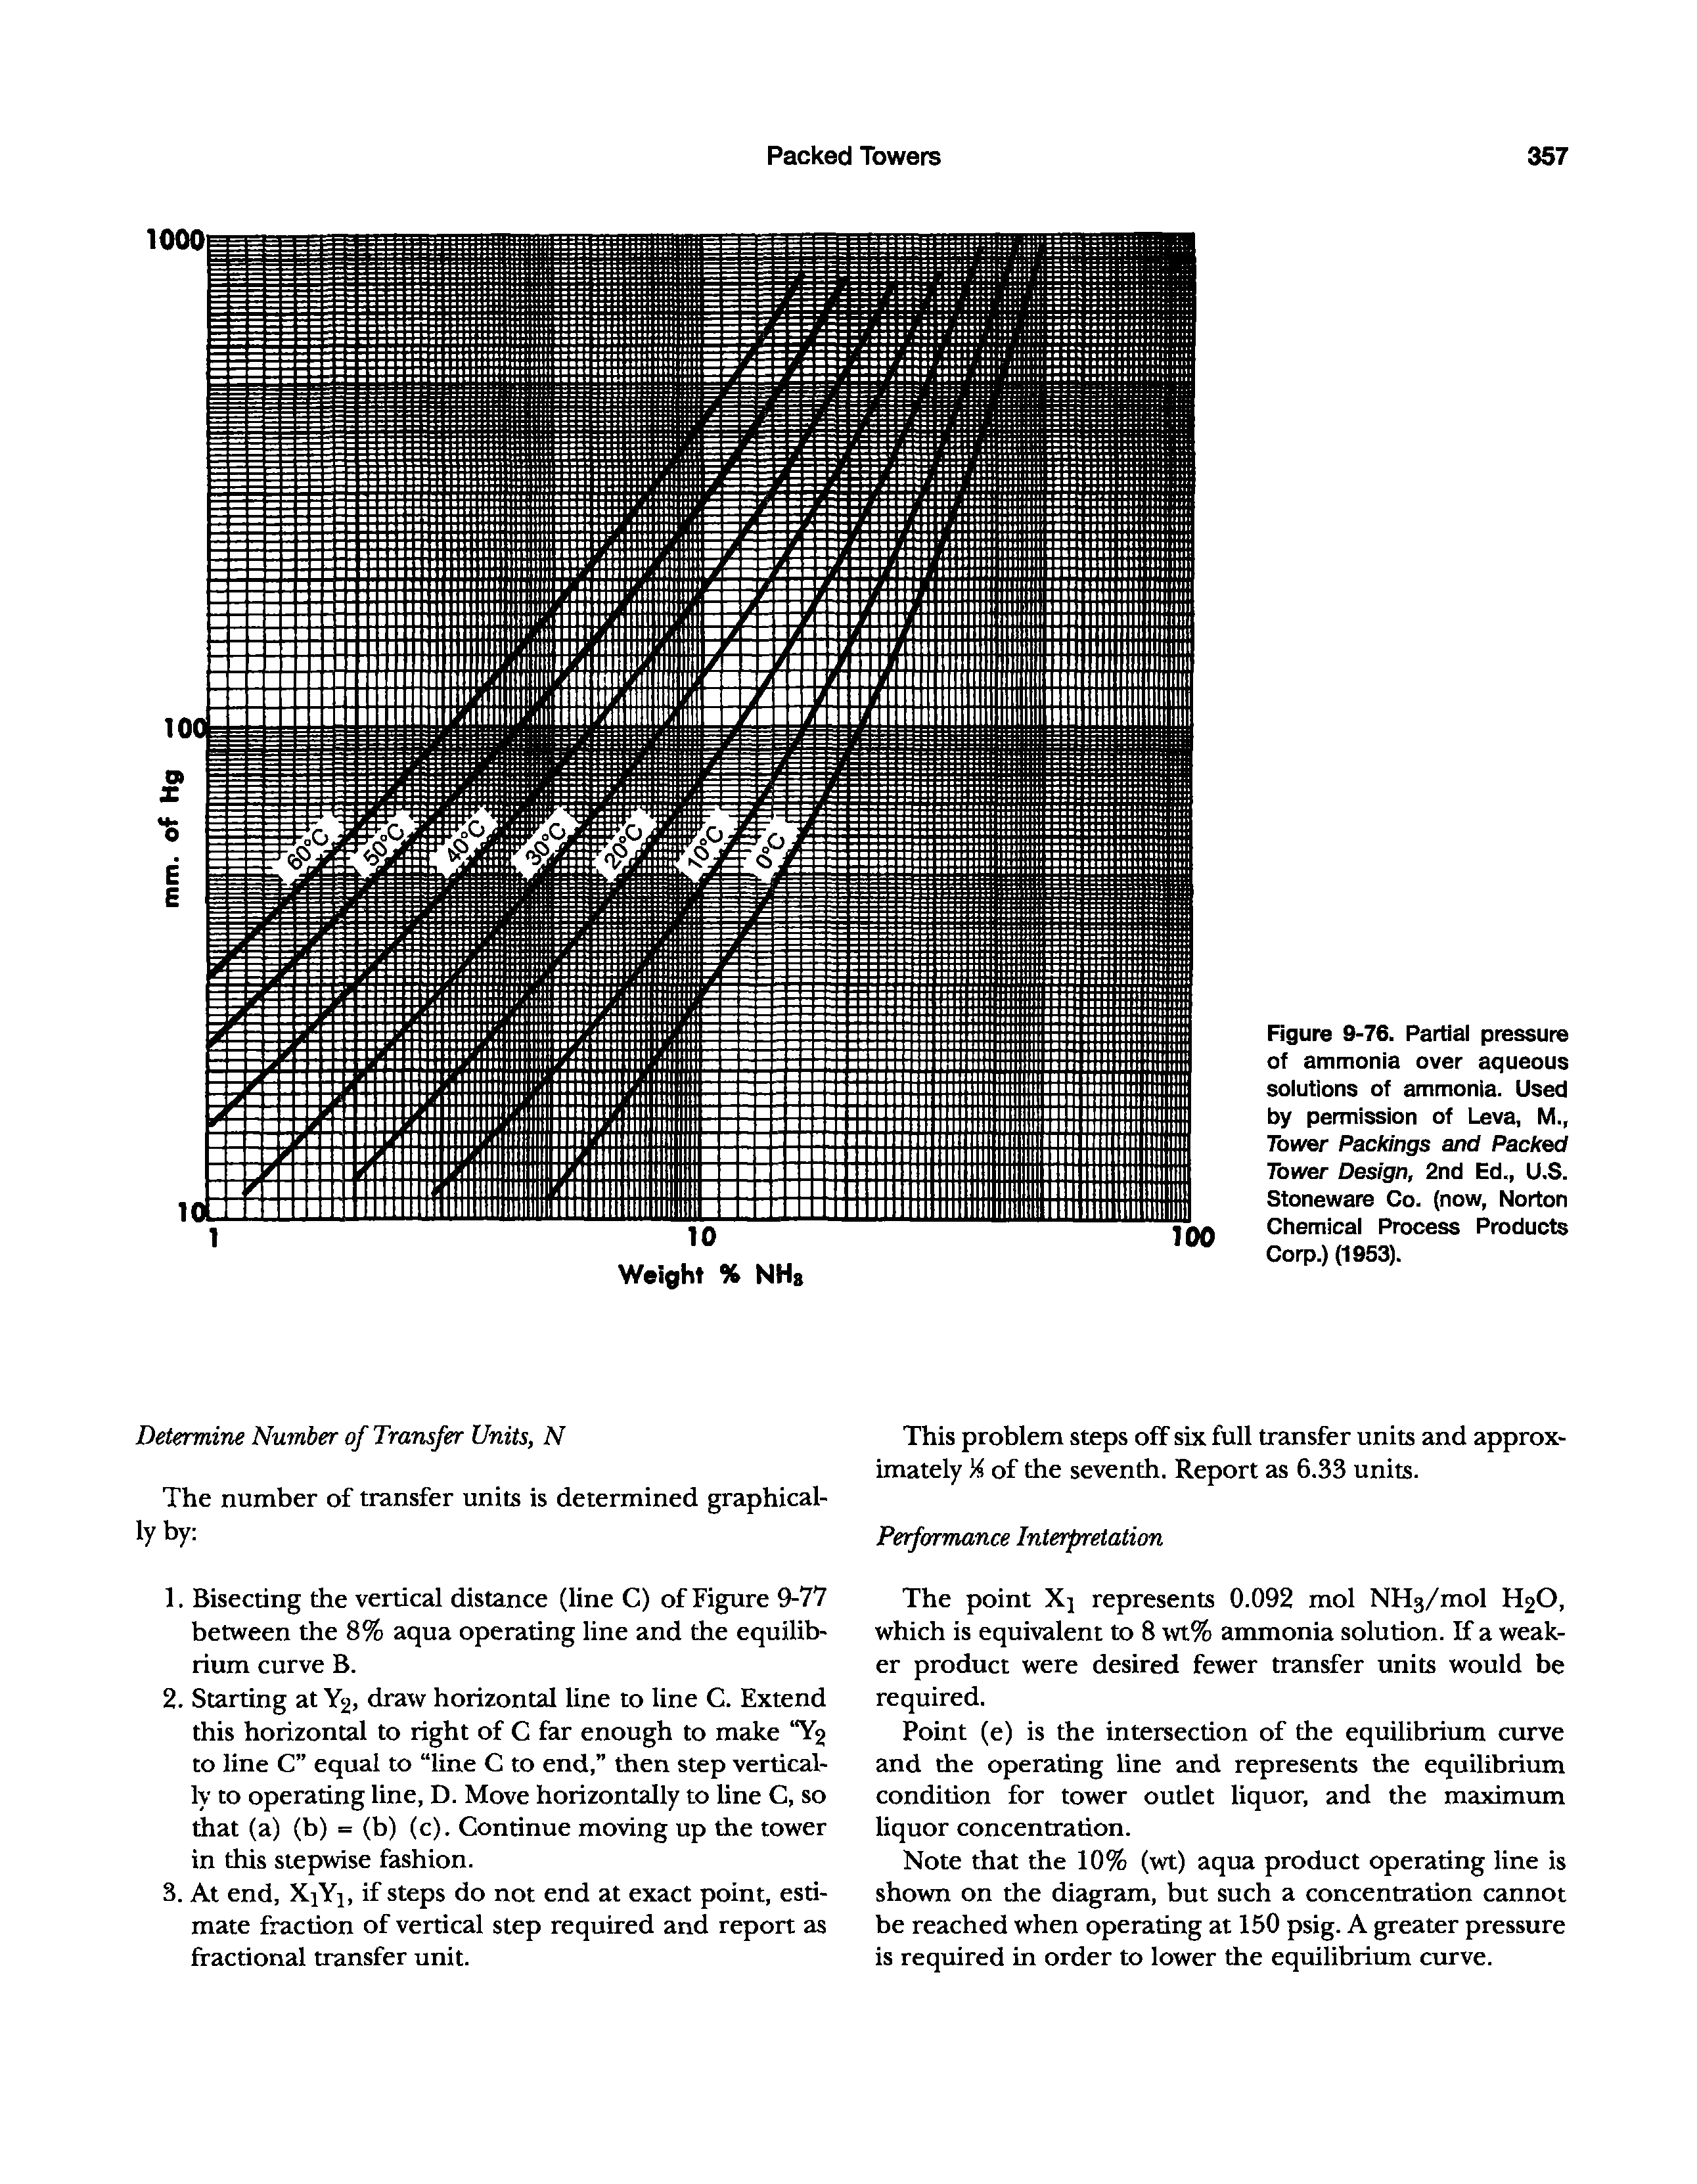 Figure 9-76. Partial pressure of ammonia over aqueous solutions of ammonia. Used by permission of Leva, M., Tower Packings and Packed Tower Design, 2nd Ed., U.S. Stoneware Co. (now, Norton Chemical Process Products Corp.) (1953).